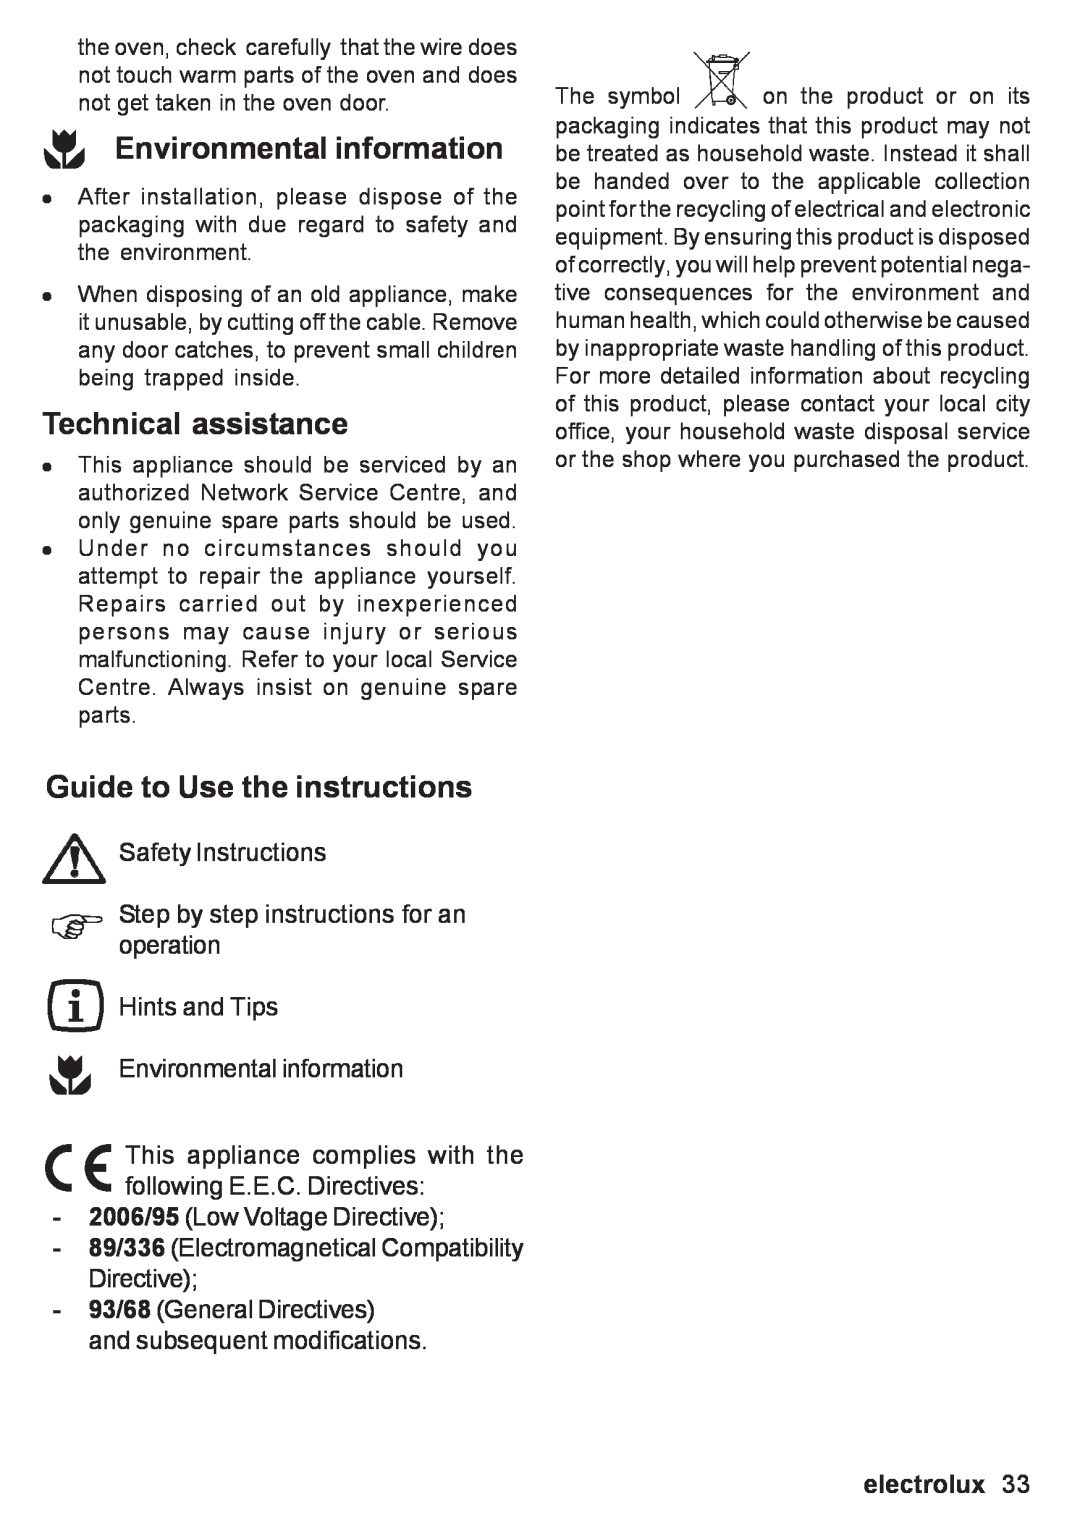 Electrolux EOB 53003 user manual Environmental information, Technical assistance, Guide to Use the instructions, electrolux 